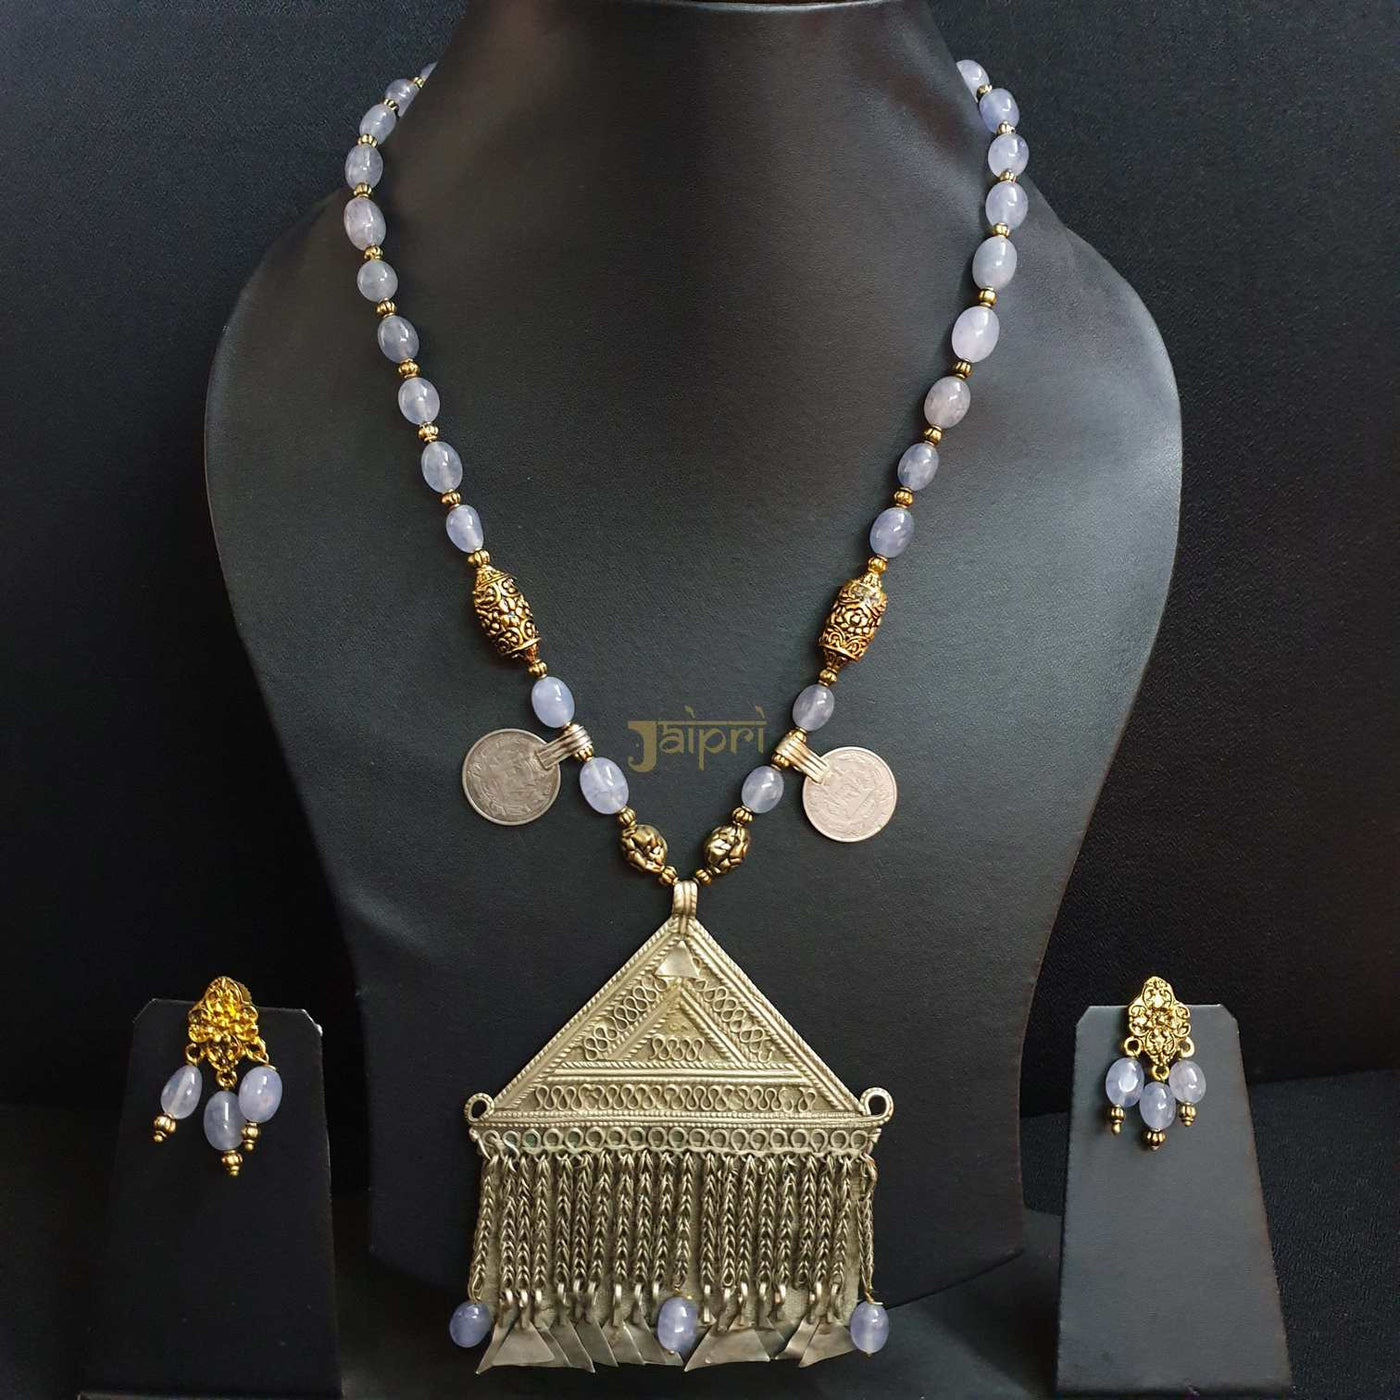 Triangle Design & Grey Stone Beads Necklace With Earrings